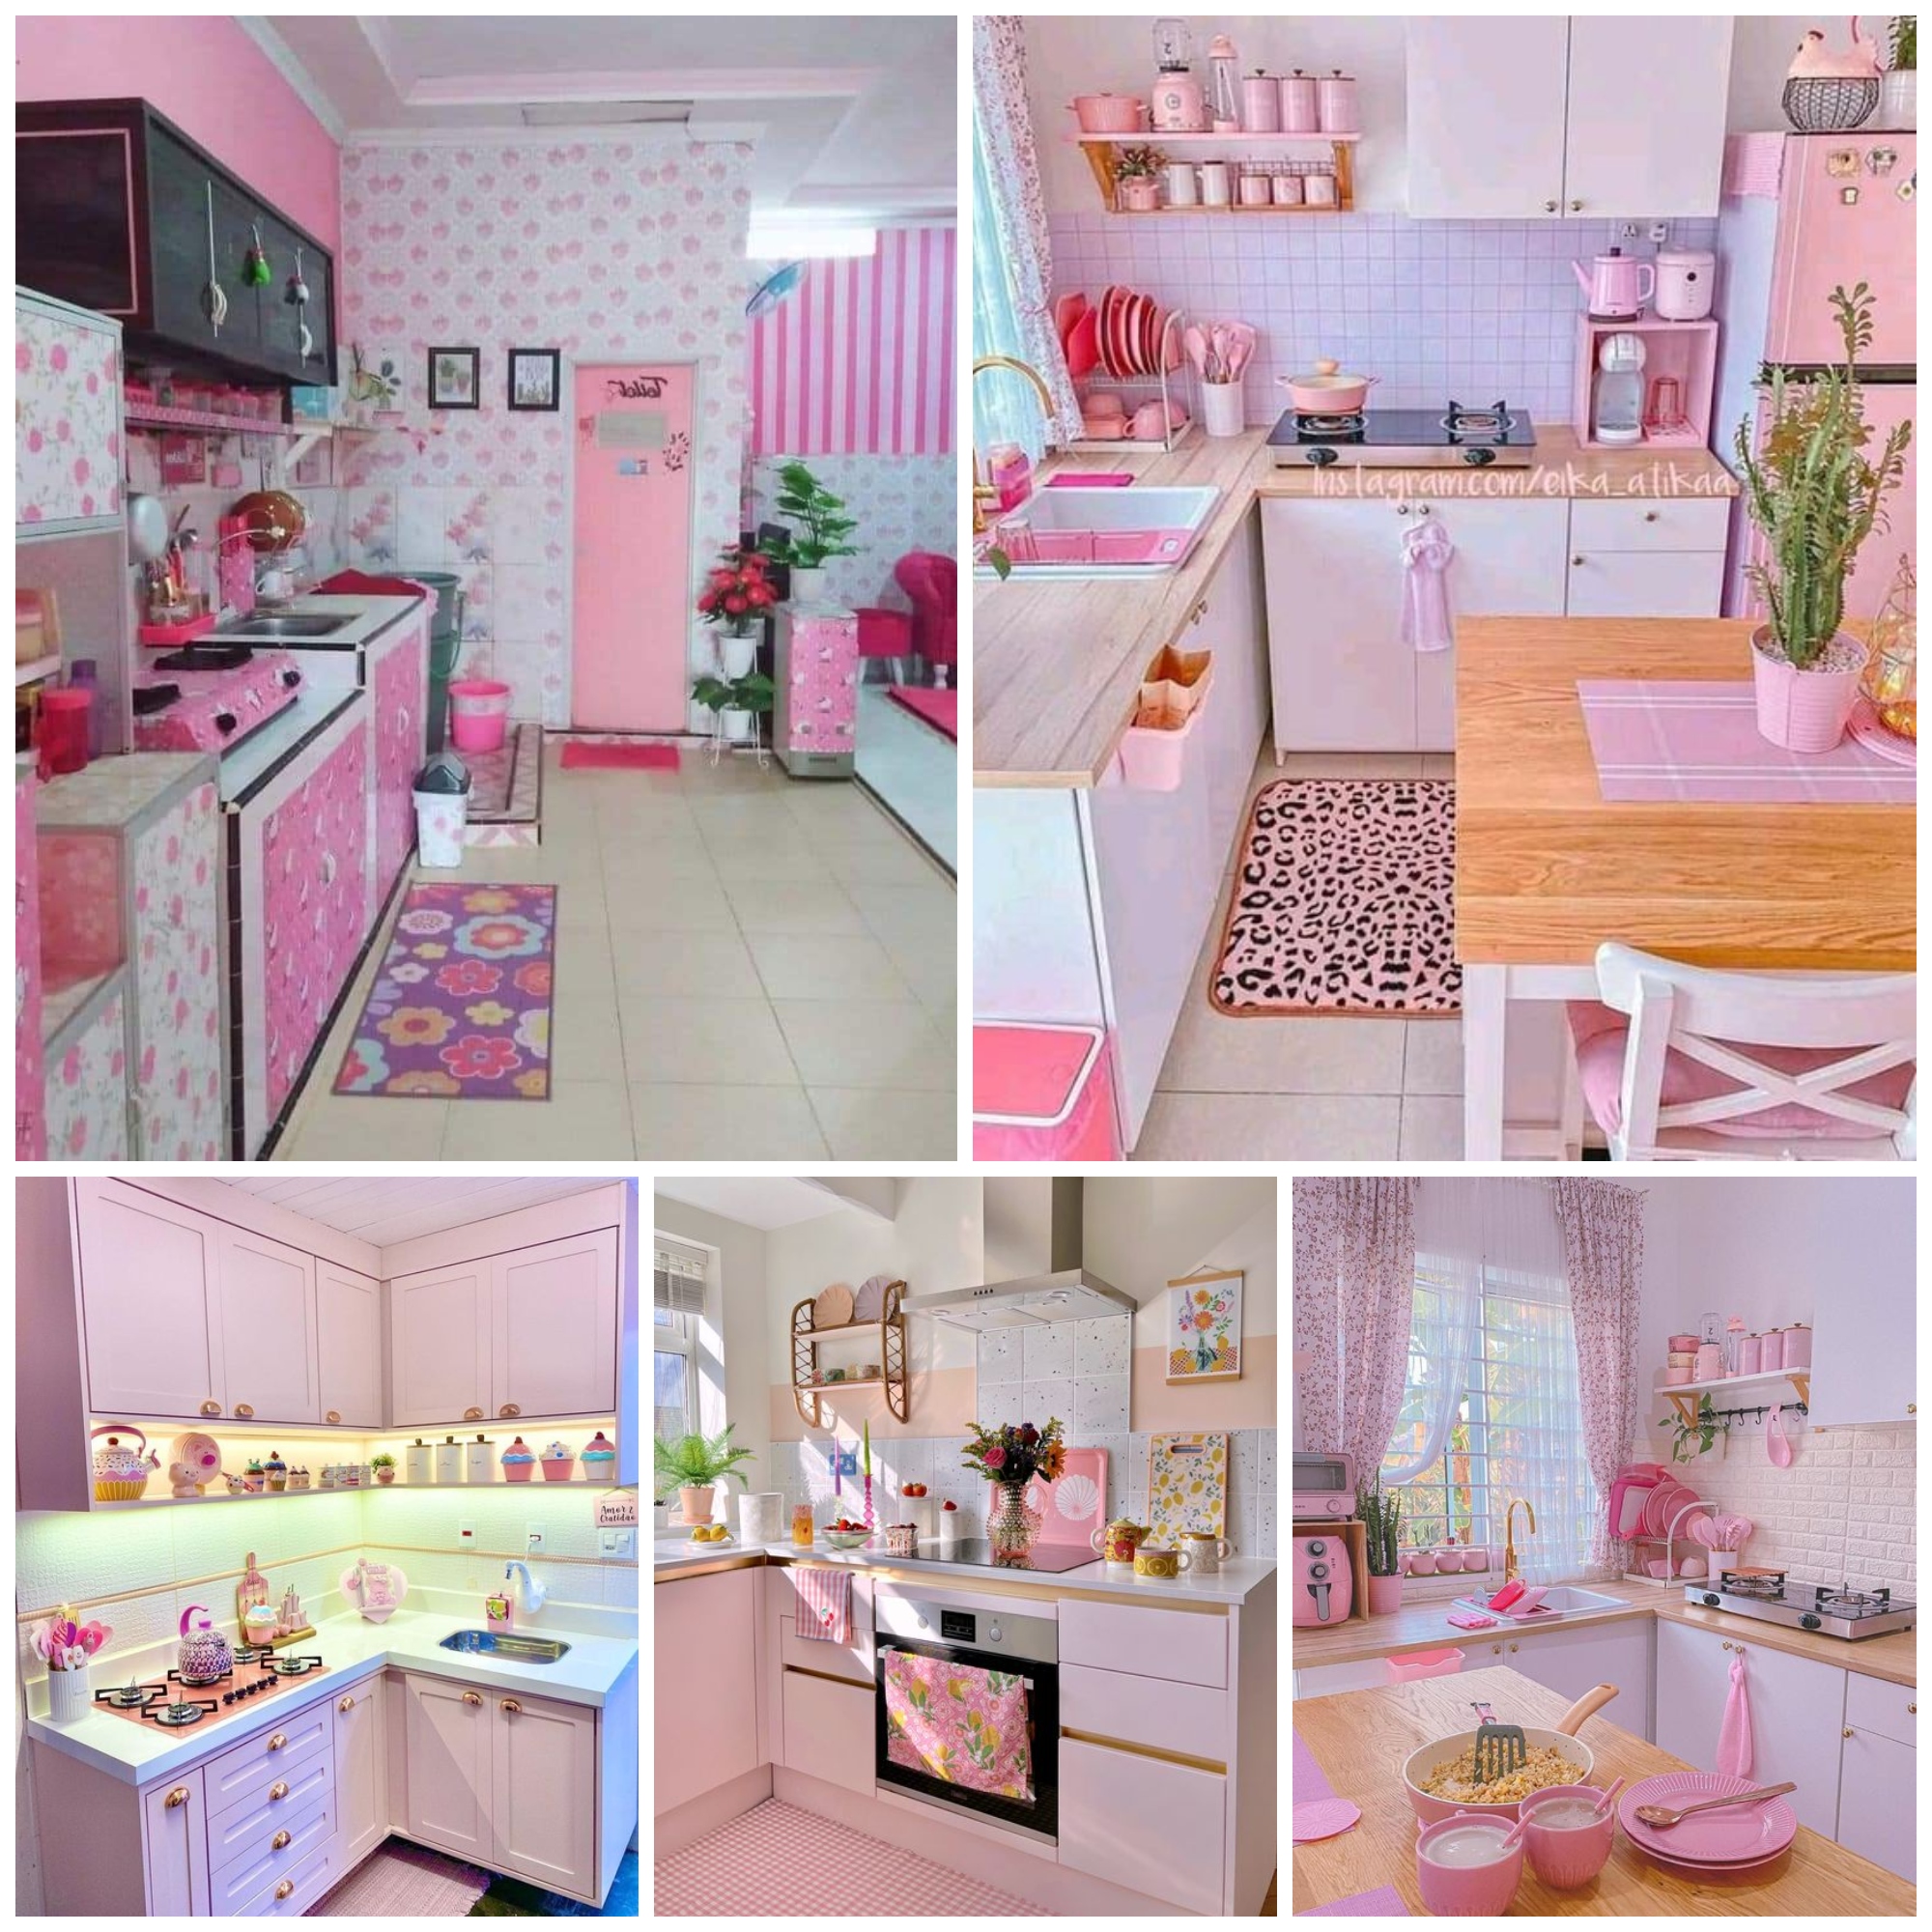 The rise of pink kitchen design